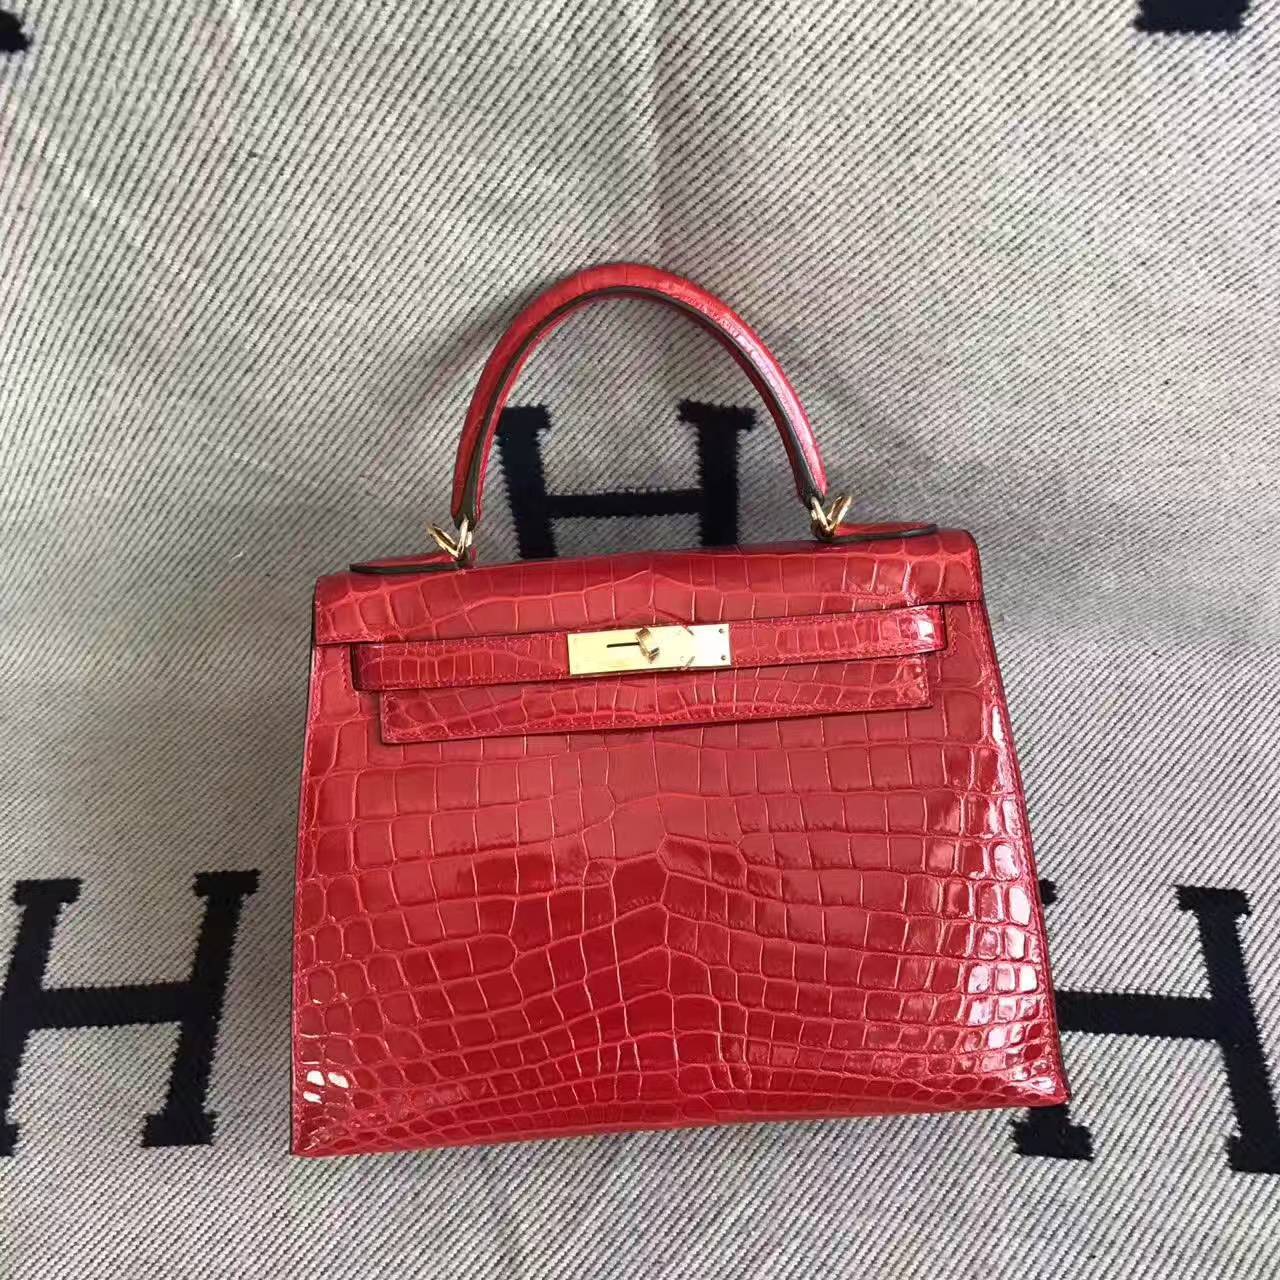 Hand Stitching Hermes Crocodile Shiny Leather Kelly 28cm in CK95 Braise